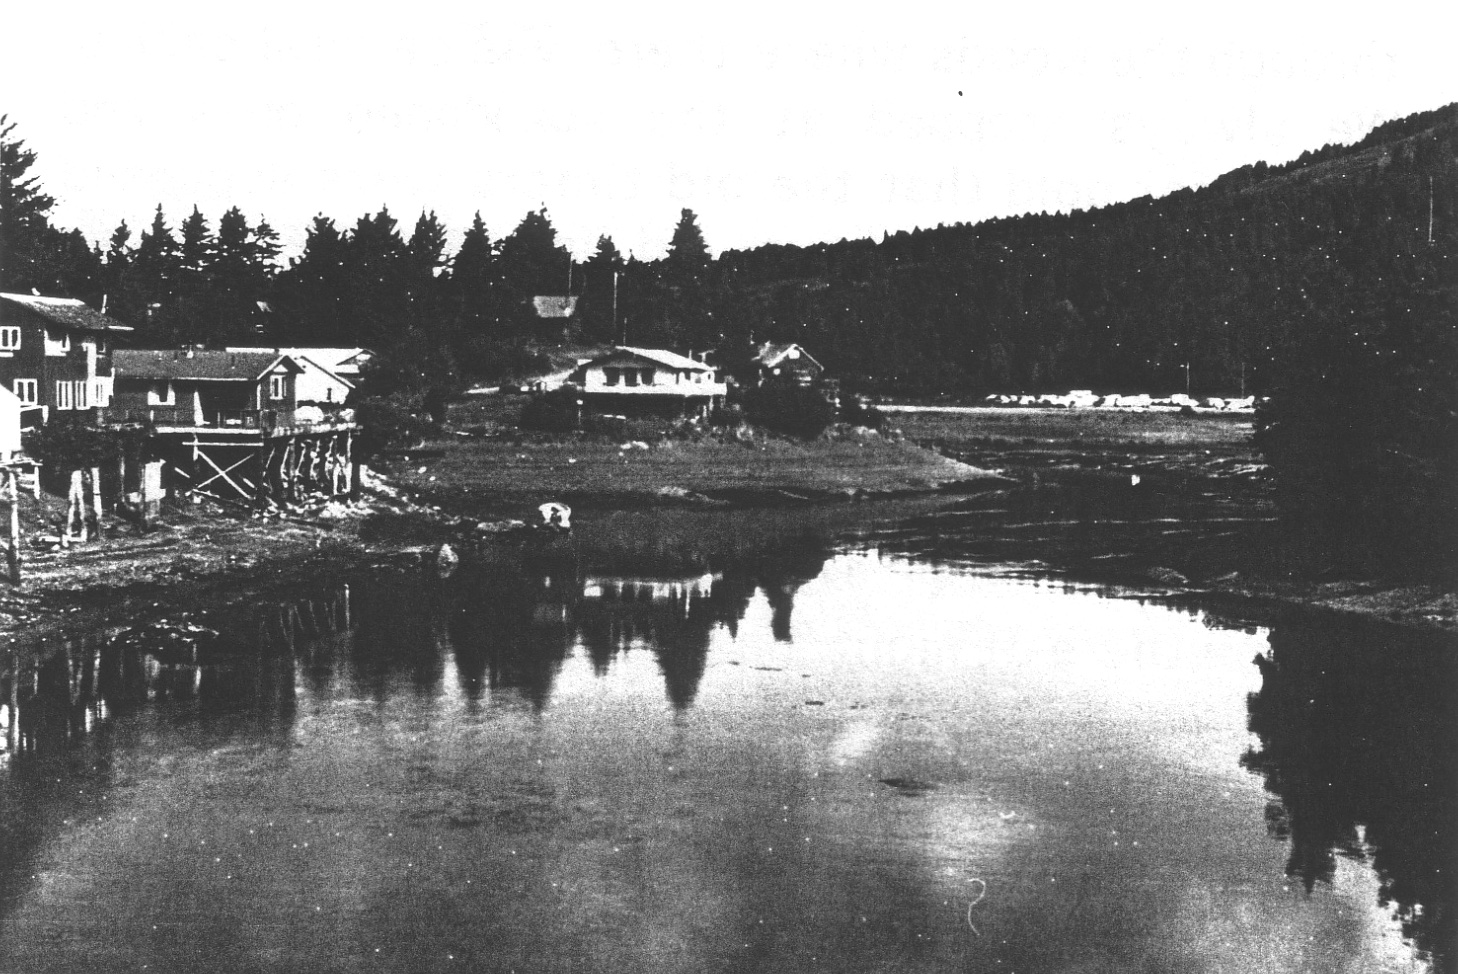 Houses along the water on the left, pines on hillsides above and on the right